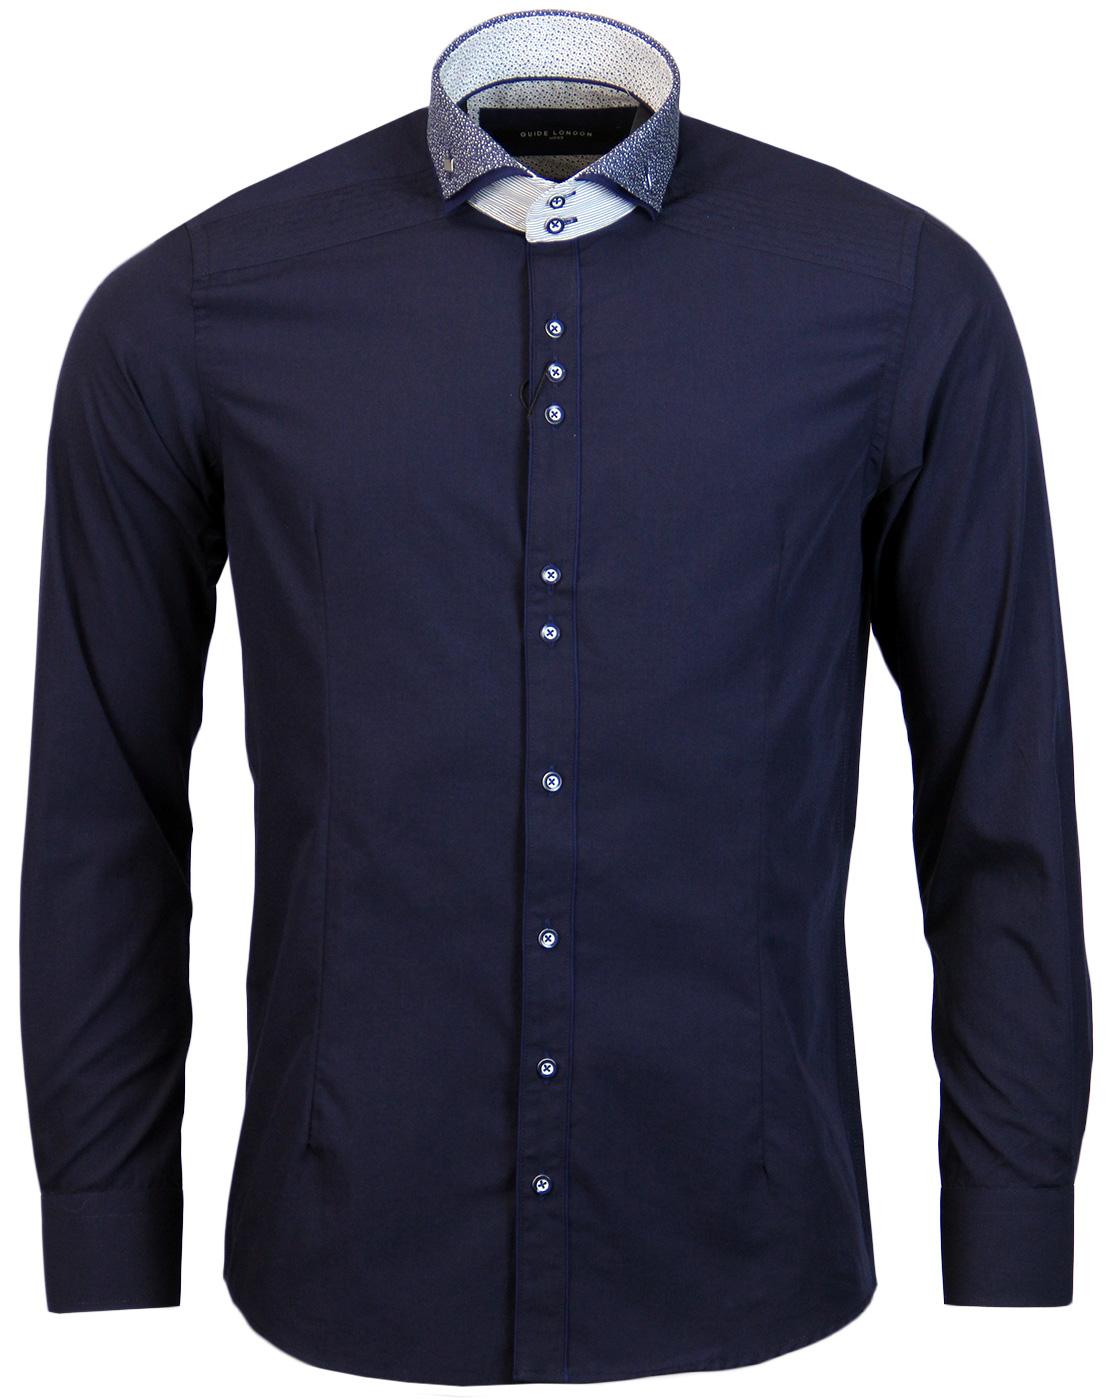 GUIDE LONDON Retro Mod Patterned Double Collar Shirt in Navy